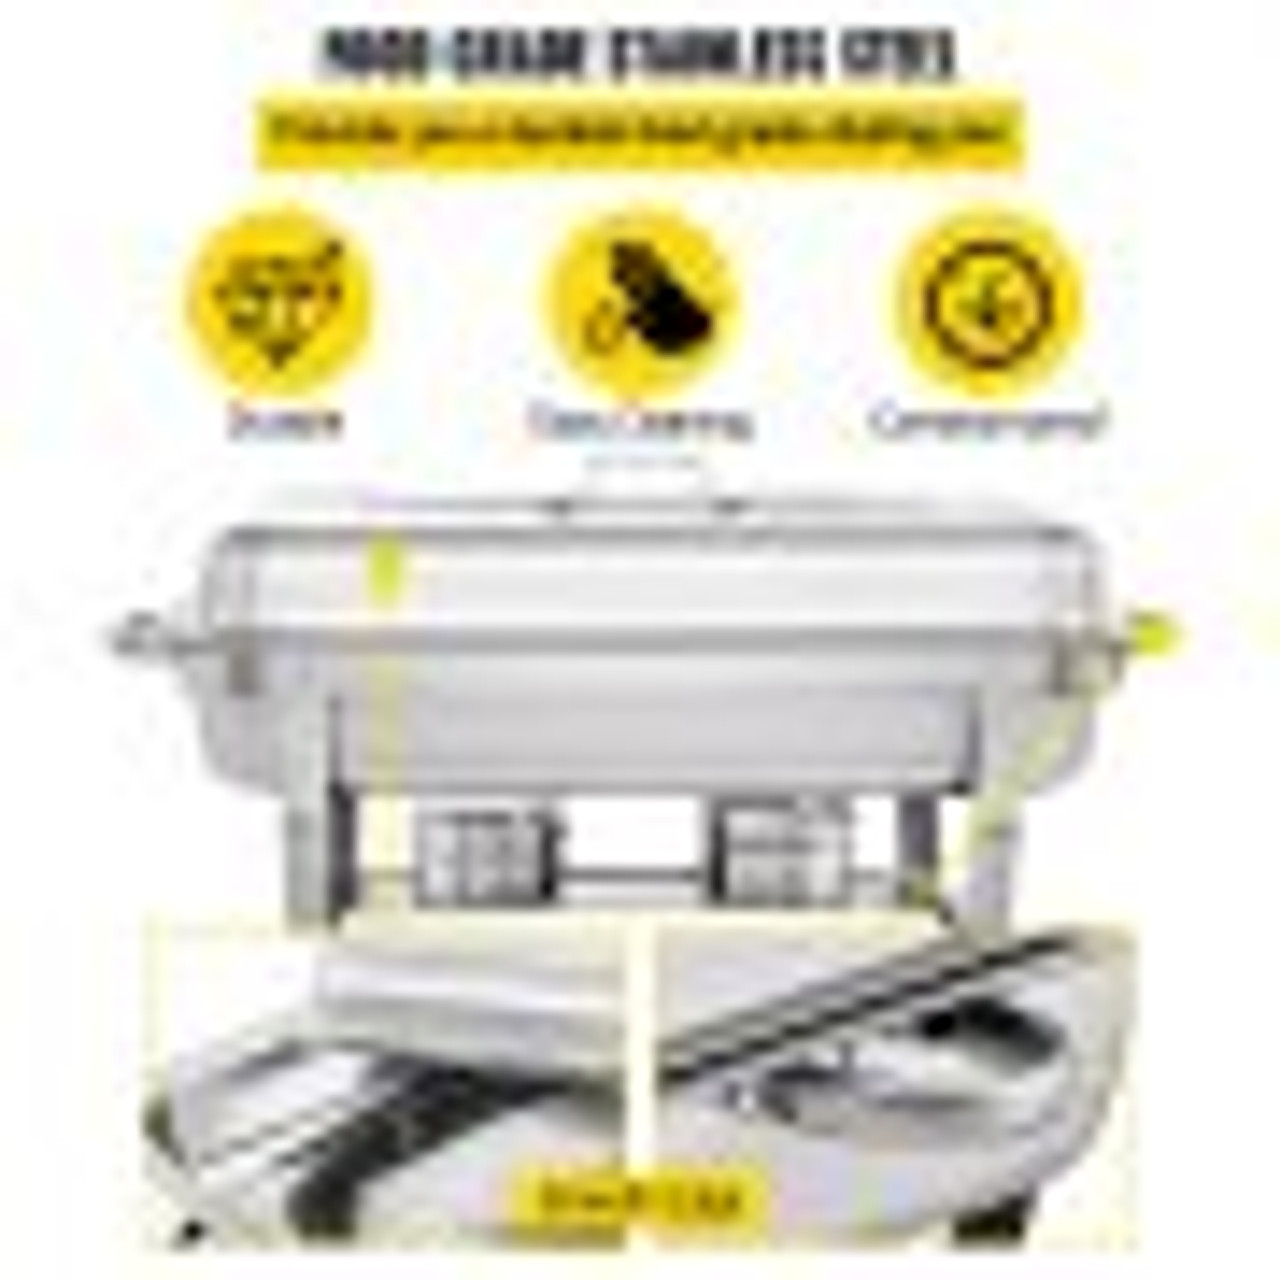 Chafing Dish 2 Packs, 9 Quart Stainless Steel Chafer Complete Set, Rectangular Chafers for Catering Buffet Warmer Set with Folding Frame